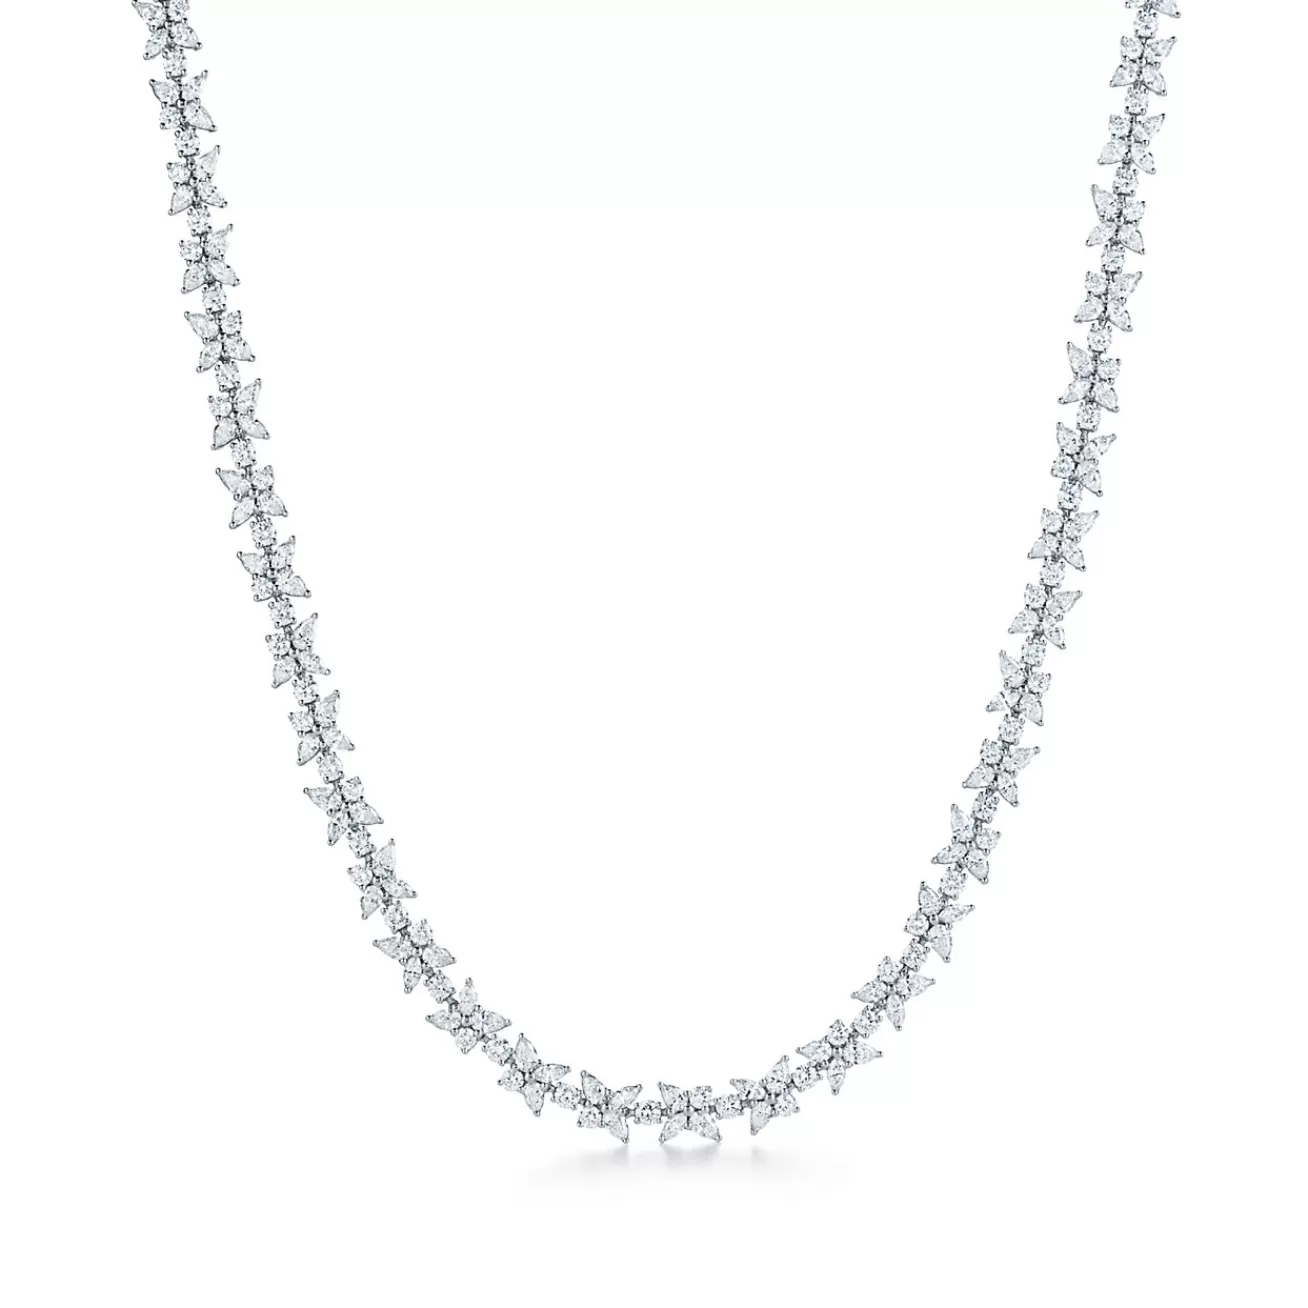 Tiffany & Co. Tiffany Victoria® mixed cluster necklace in platinum with diamonds. | ^ Necklaces & Pendants | Platinum Jewelry